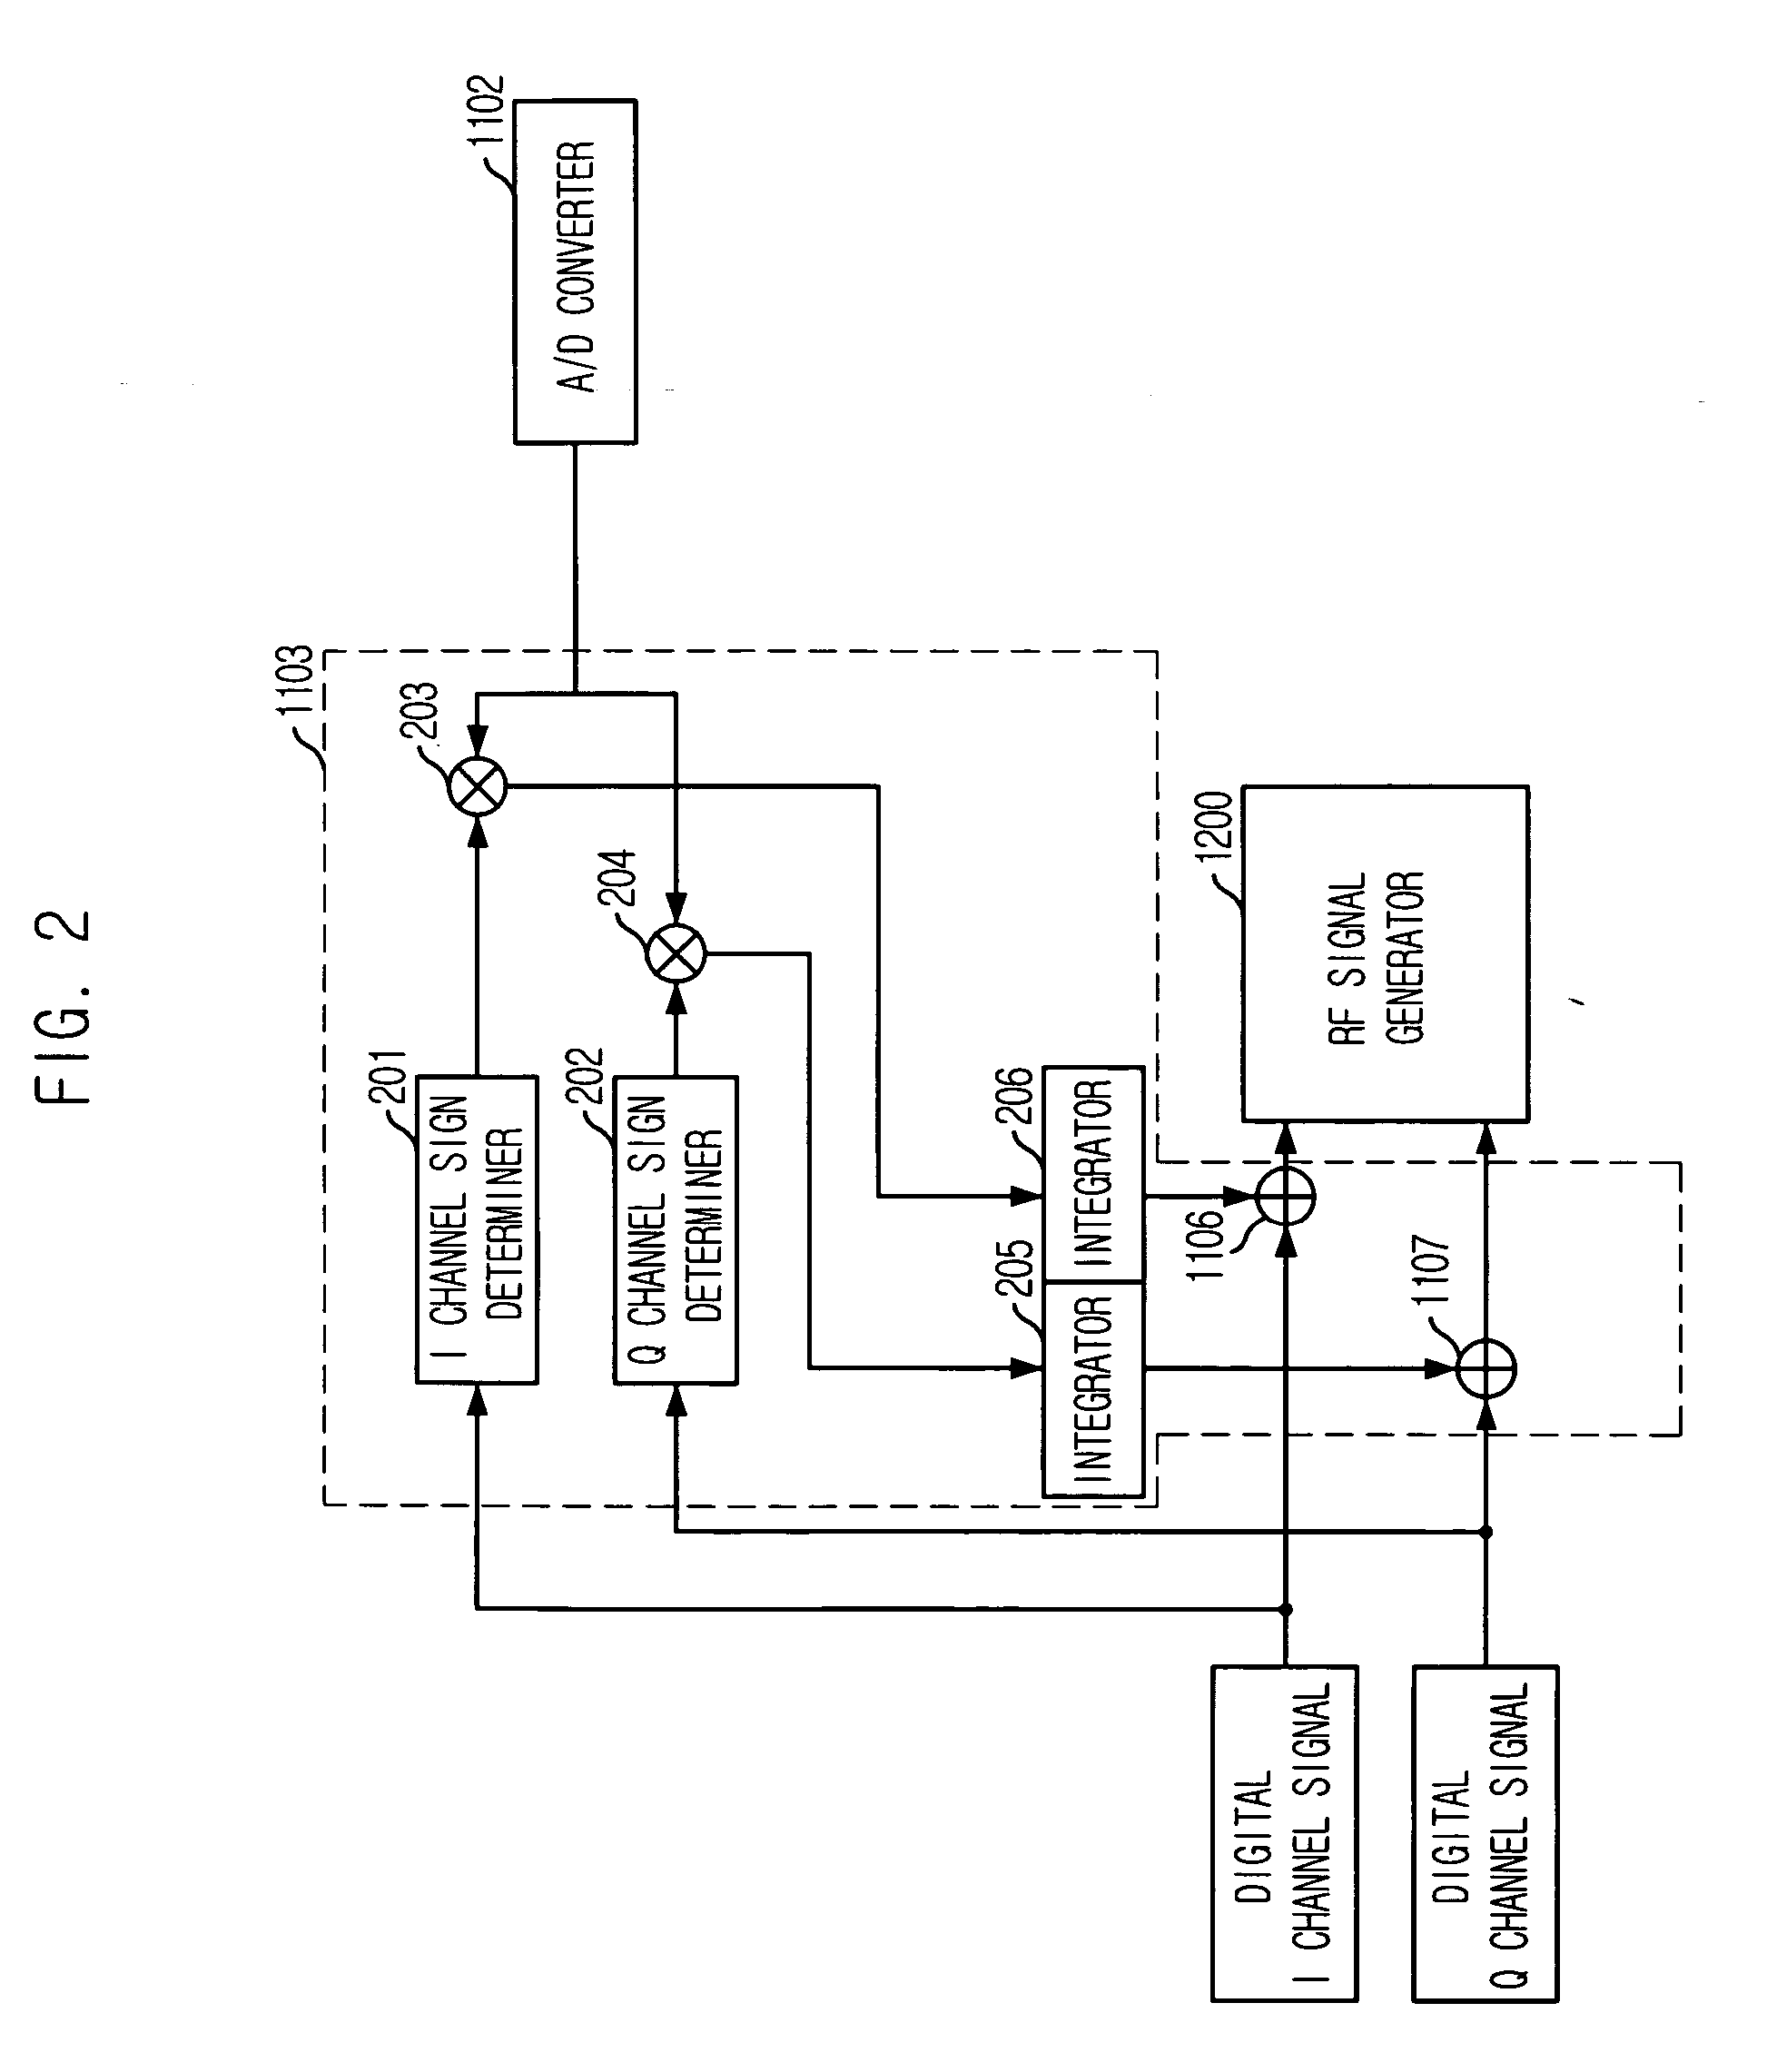 Apparatus for compensating DC offsets, gain and phase imbalances between I-channel and Q-channel in quadrature transceiving system